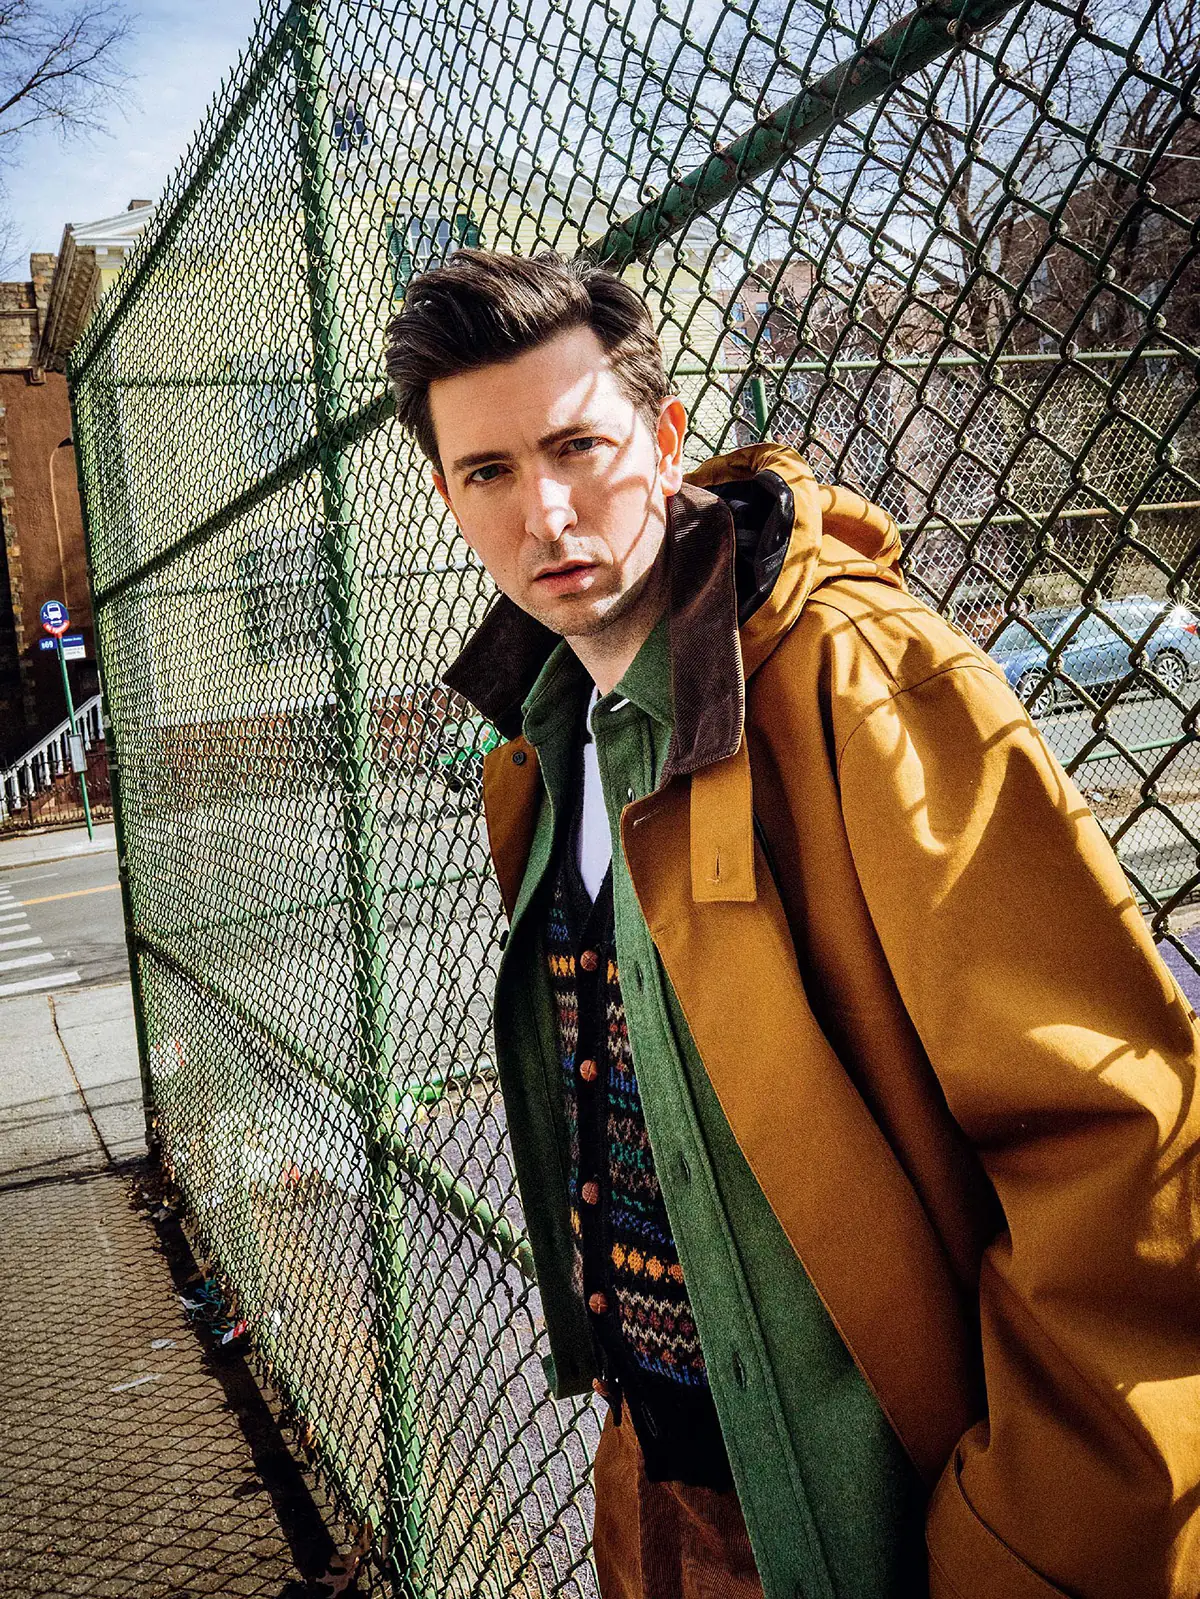 Nicholas Braun covers The Sunday Times Style March 19th, 2023 by Sinna Nasseri